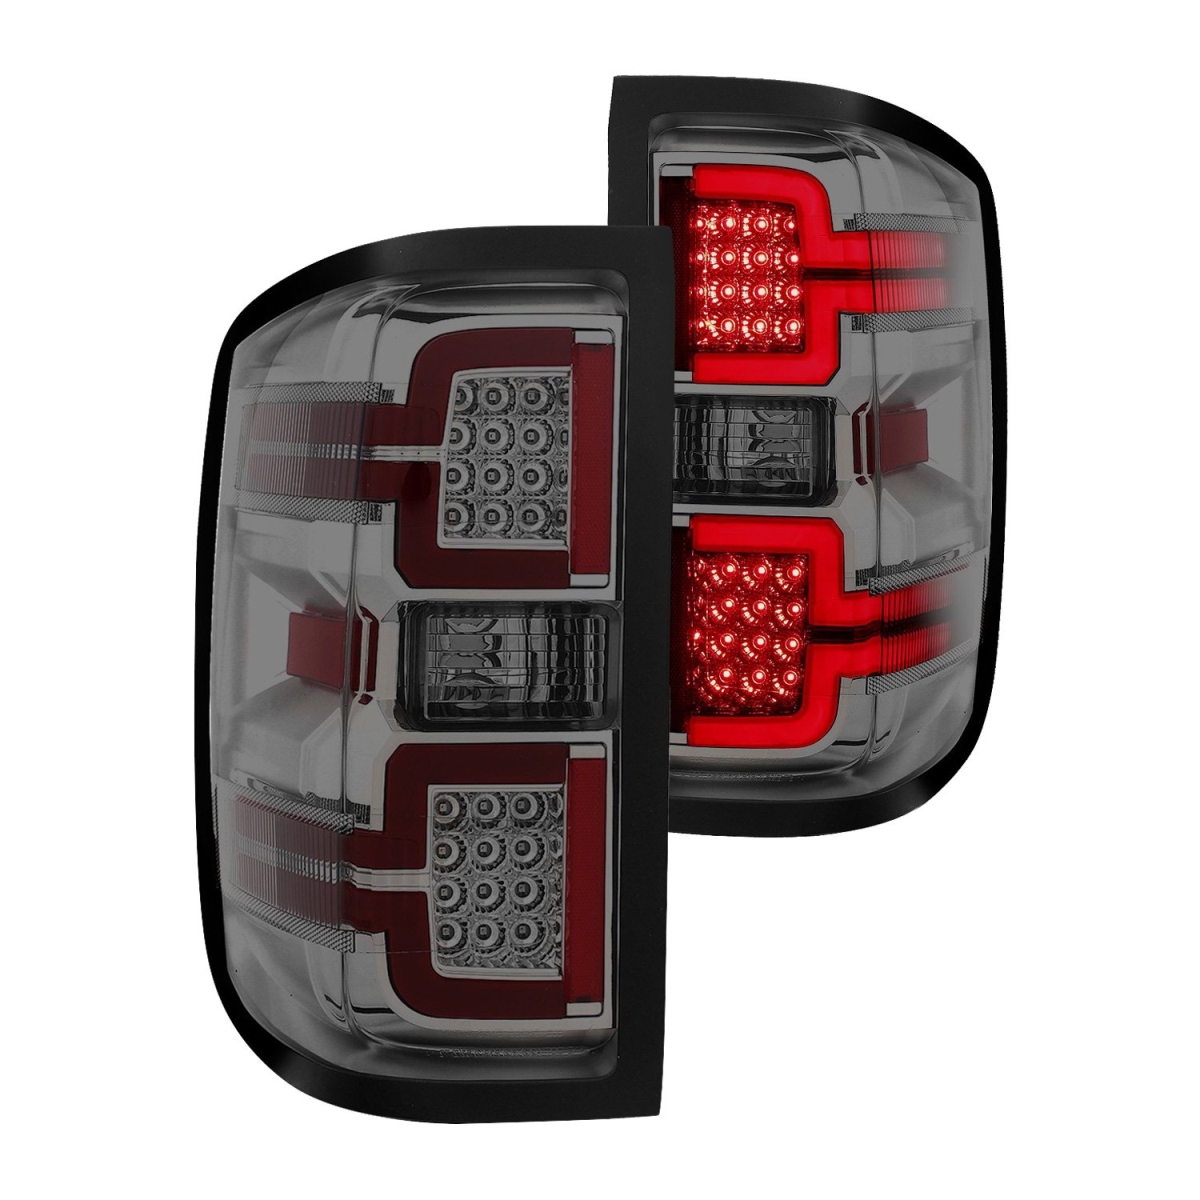 311290 Sequential Fiber Optic Led Tail Light For 2014-2019 Chevy Silverad0 1500 & 3500 - Chrome & Smoke